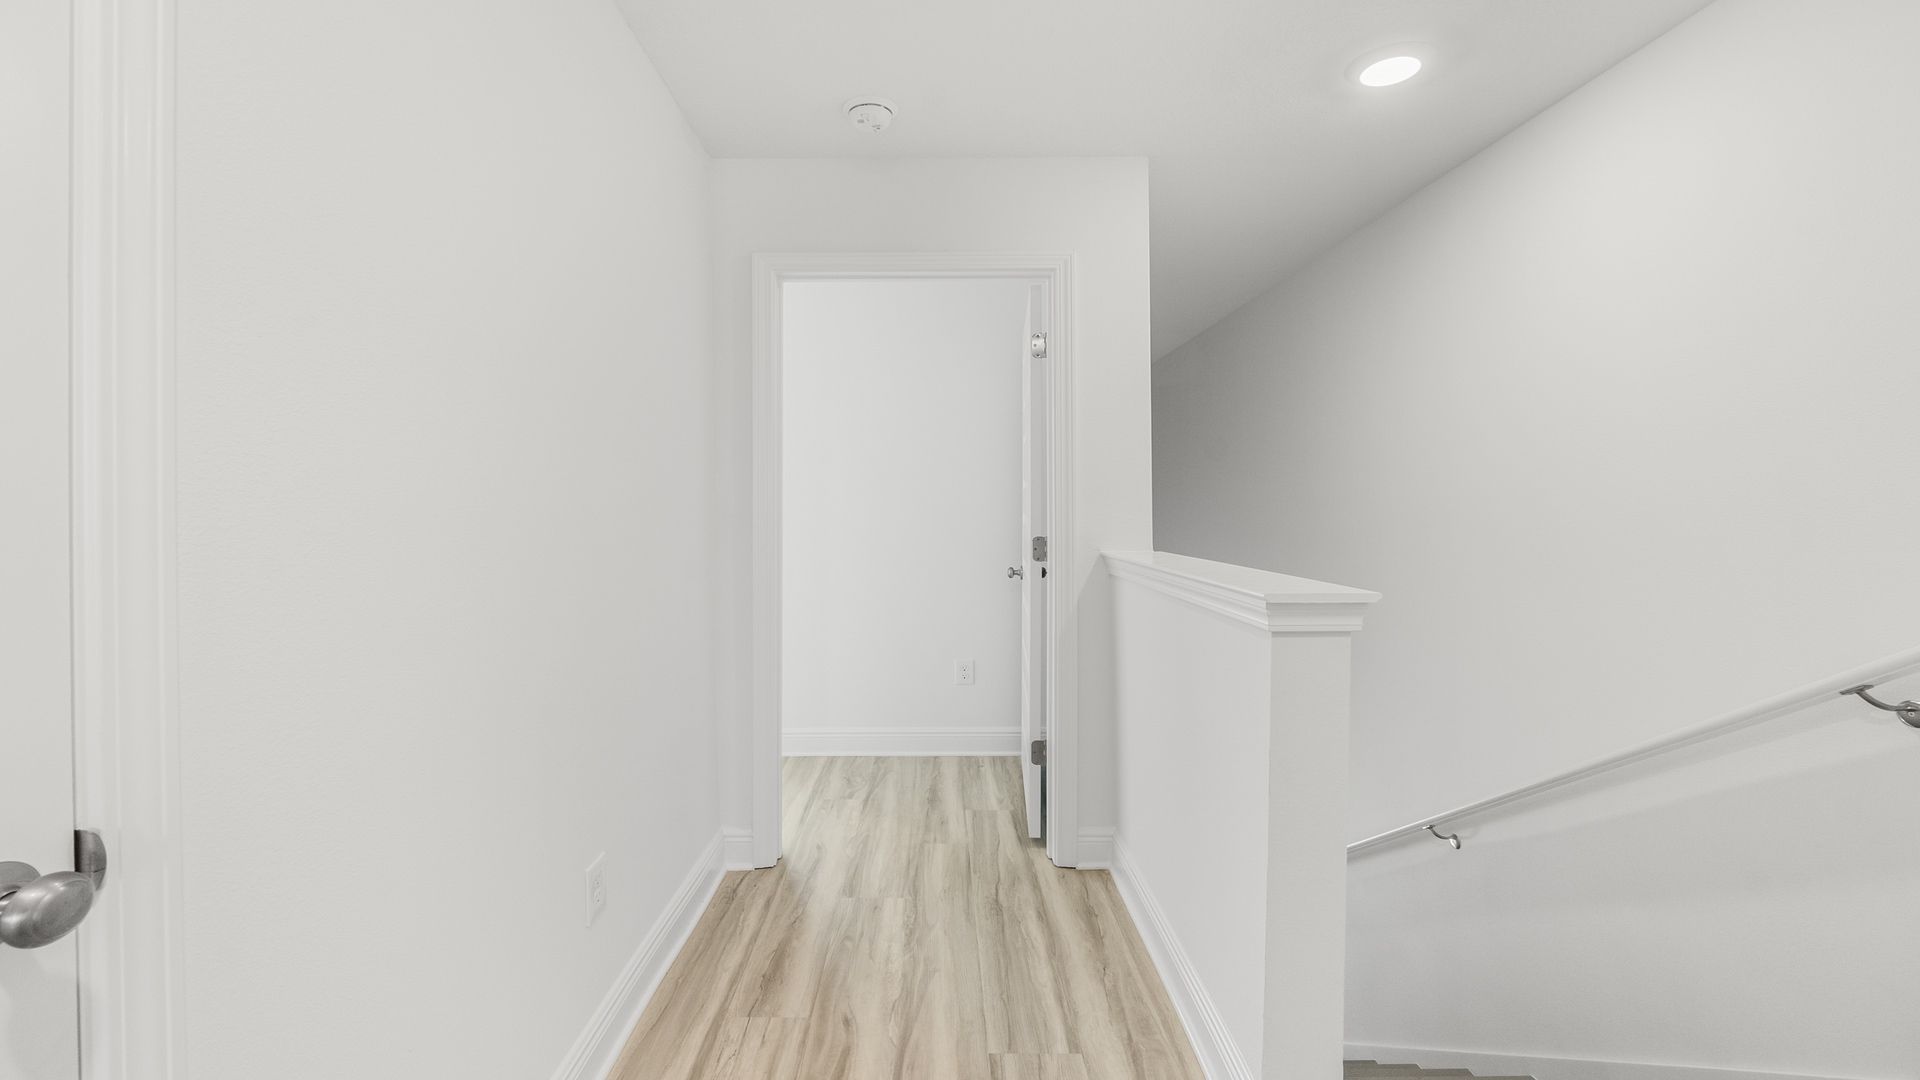 Top of staircase with bedroom entrance.